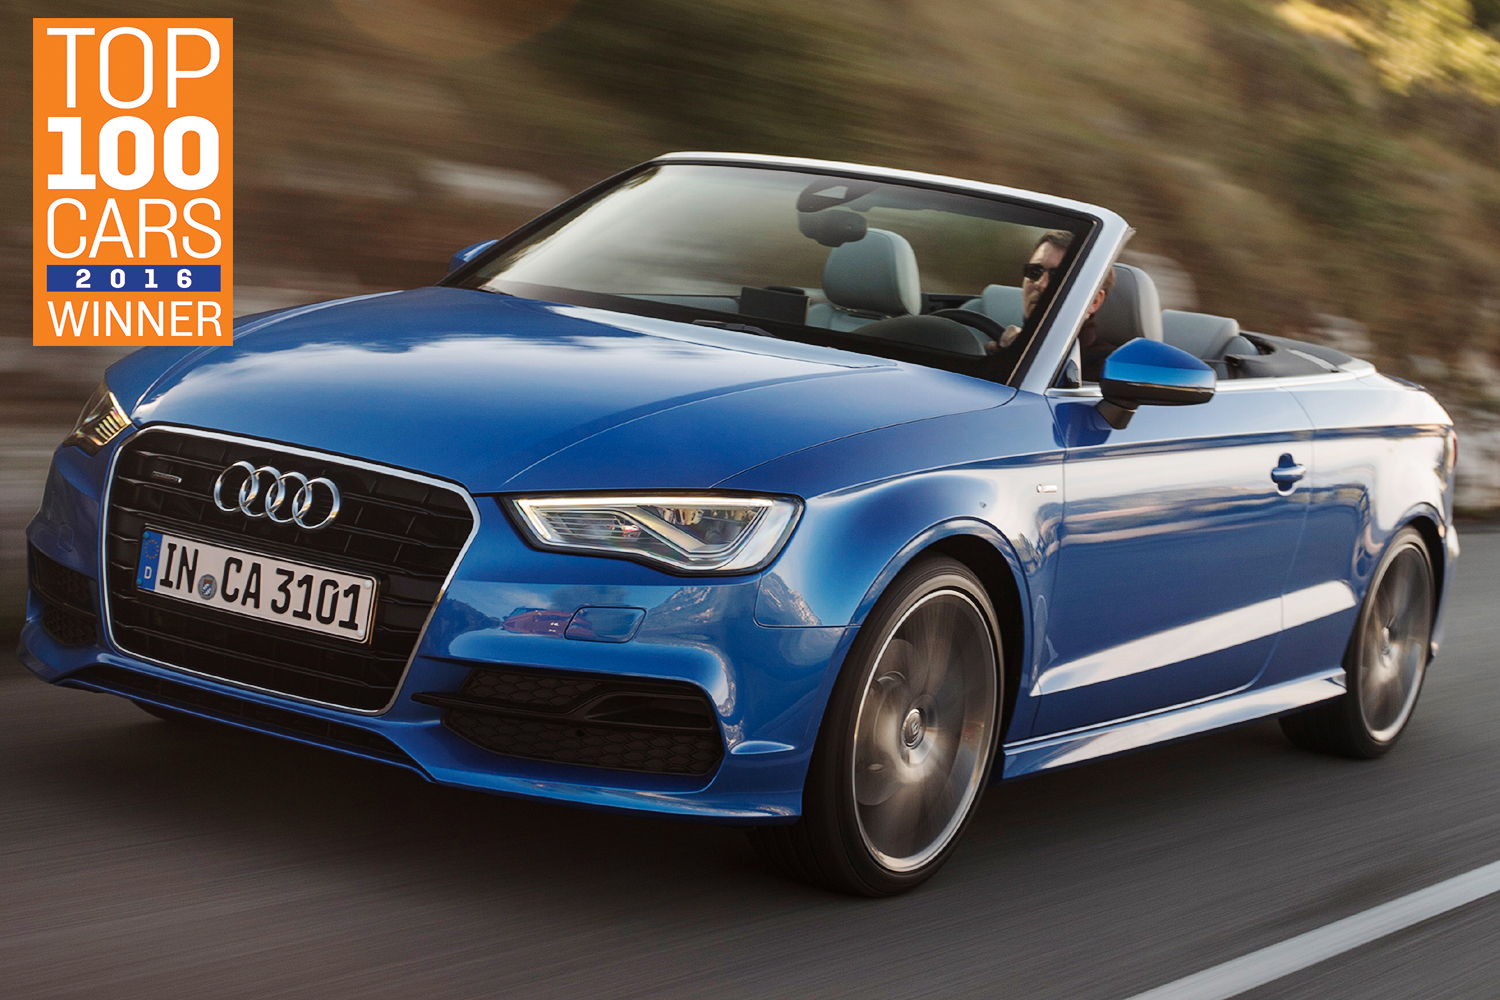 Audi A3 Cabriolet: The Sunday Times Top 100 Cars 2016: Top 5 Supercars